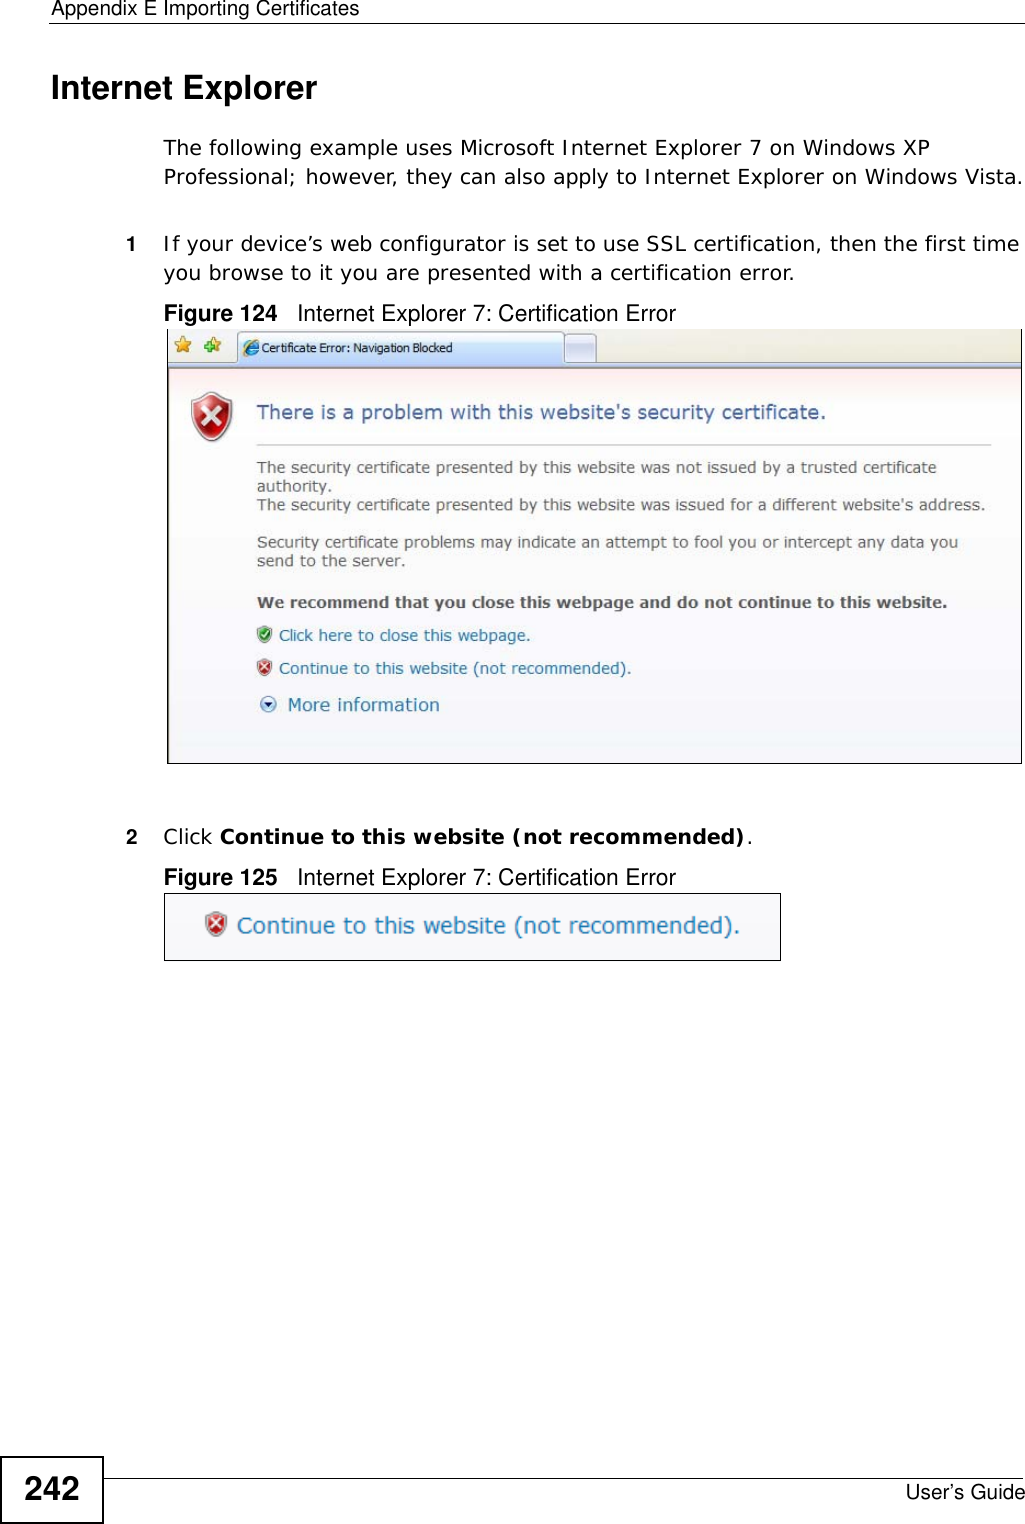 Appendix E Importing CertificatesUser’s Guide242Internet ExplorerThe following example uses Microsoft Internet Explorer 7 on Windows XP Professional; however, they can also apply to Internet Explorer on Windows Vista.1If your device’s web configurator is set to use SSL certification, then the first time you browse to it you are presented with a certification error.Figure 124   Internet Explorer 7: Certification Error2Click Continue to this website (not recommended).Figure 125   Internet Explorer 7: Certification Error